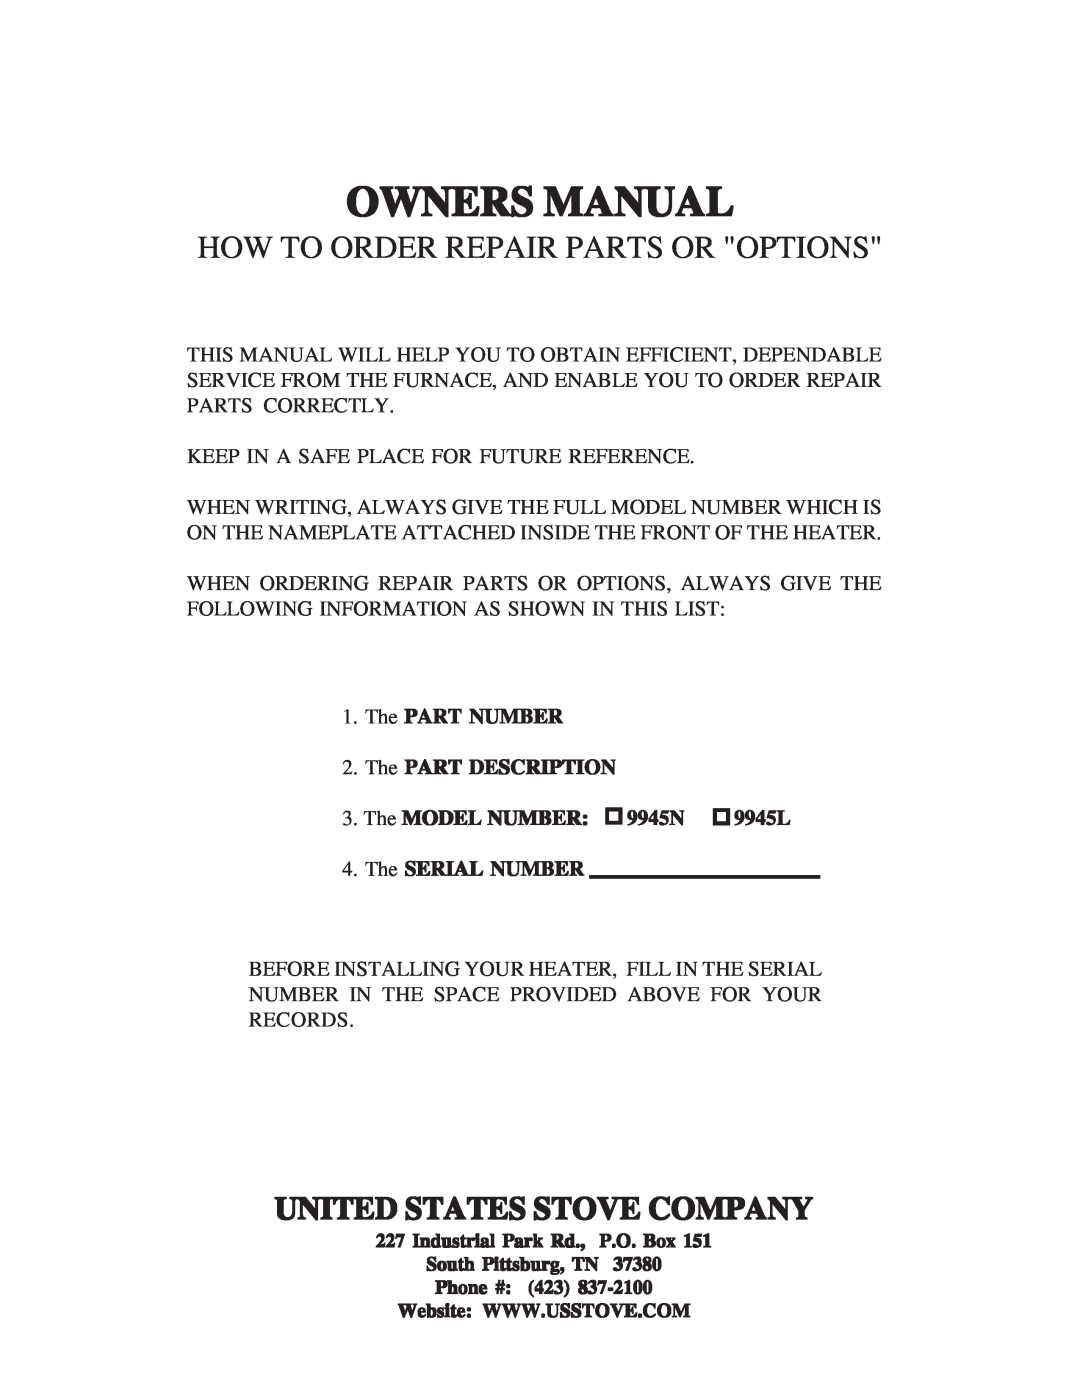 United States Stove B9945N manual United States Stove Company, How To Order Repair Parts Or Options, The MODEL NUMBER 9945N 